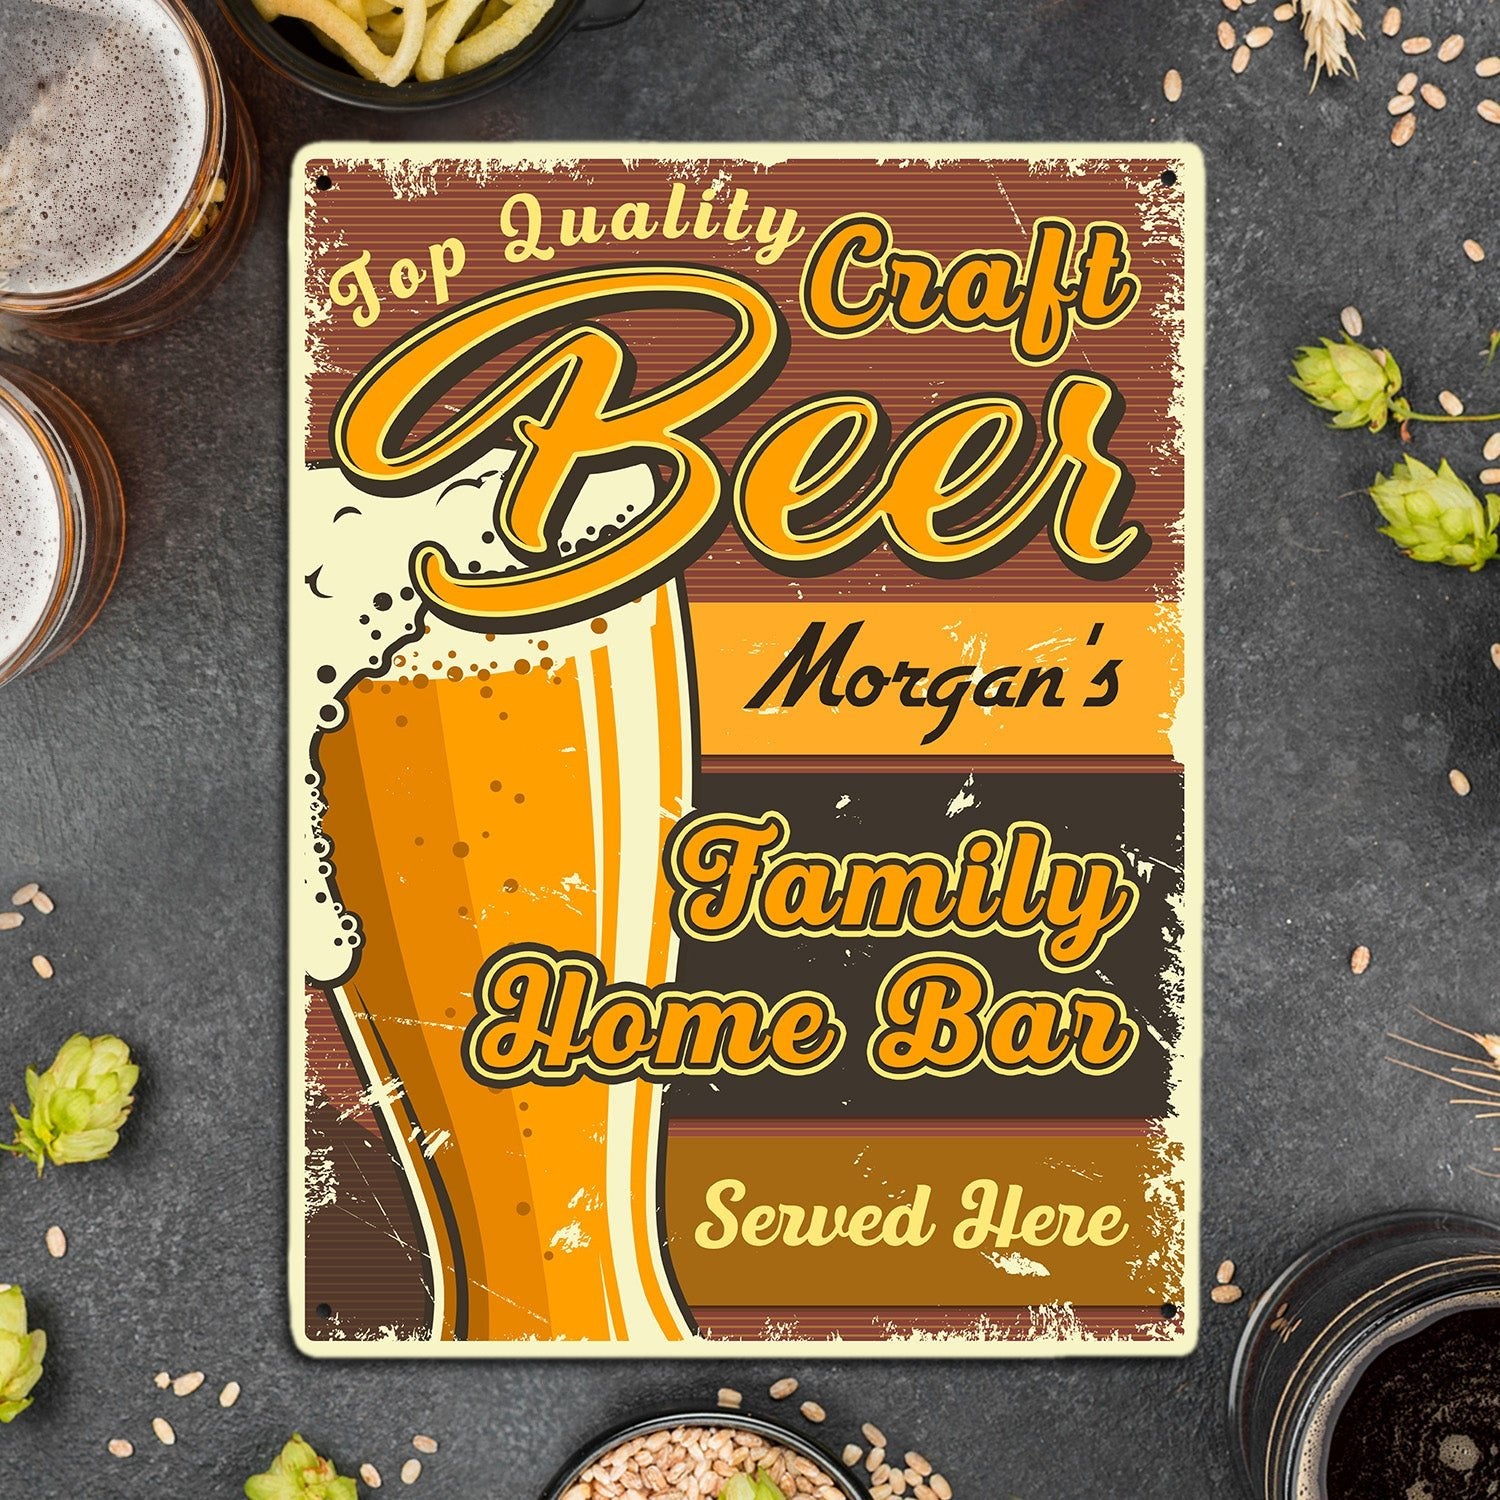 Top Quality Craft Beer, Family Home Bar, Served Here, Custom Metal Signs